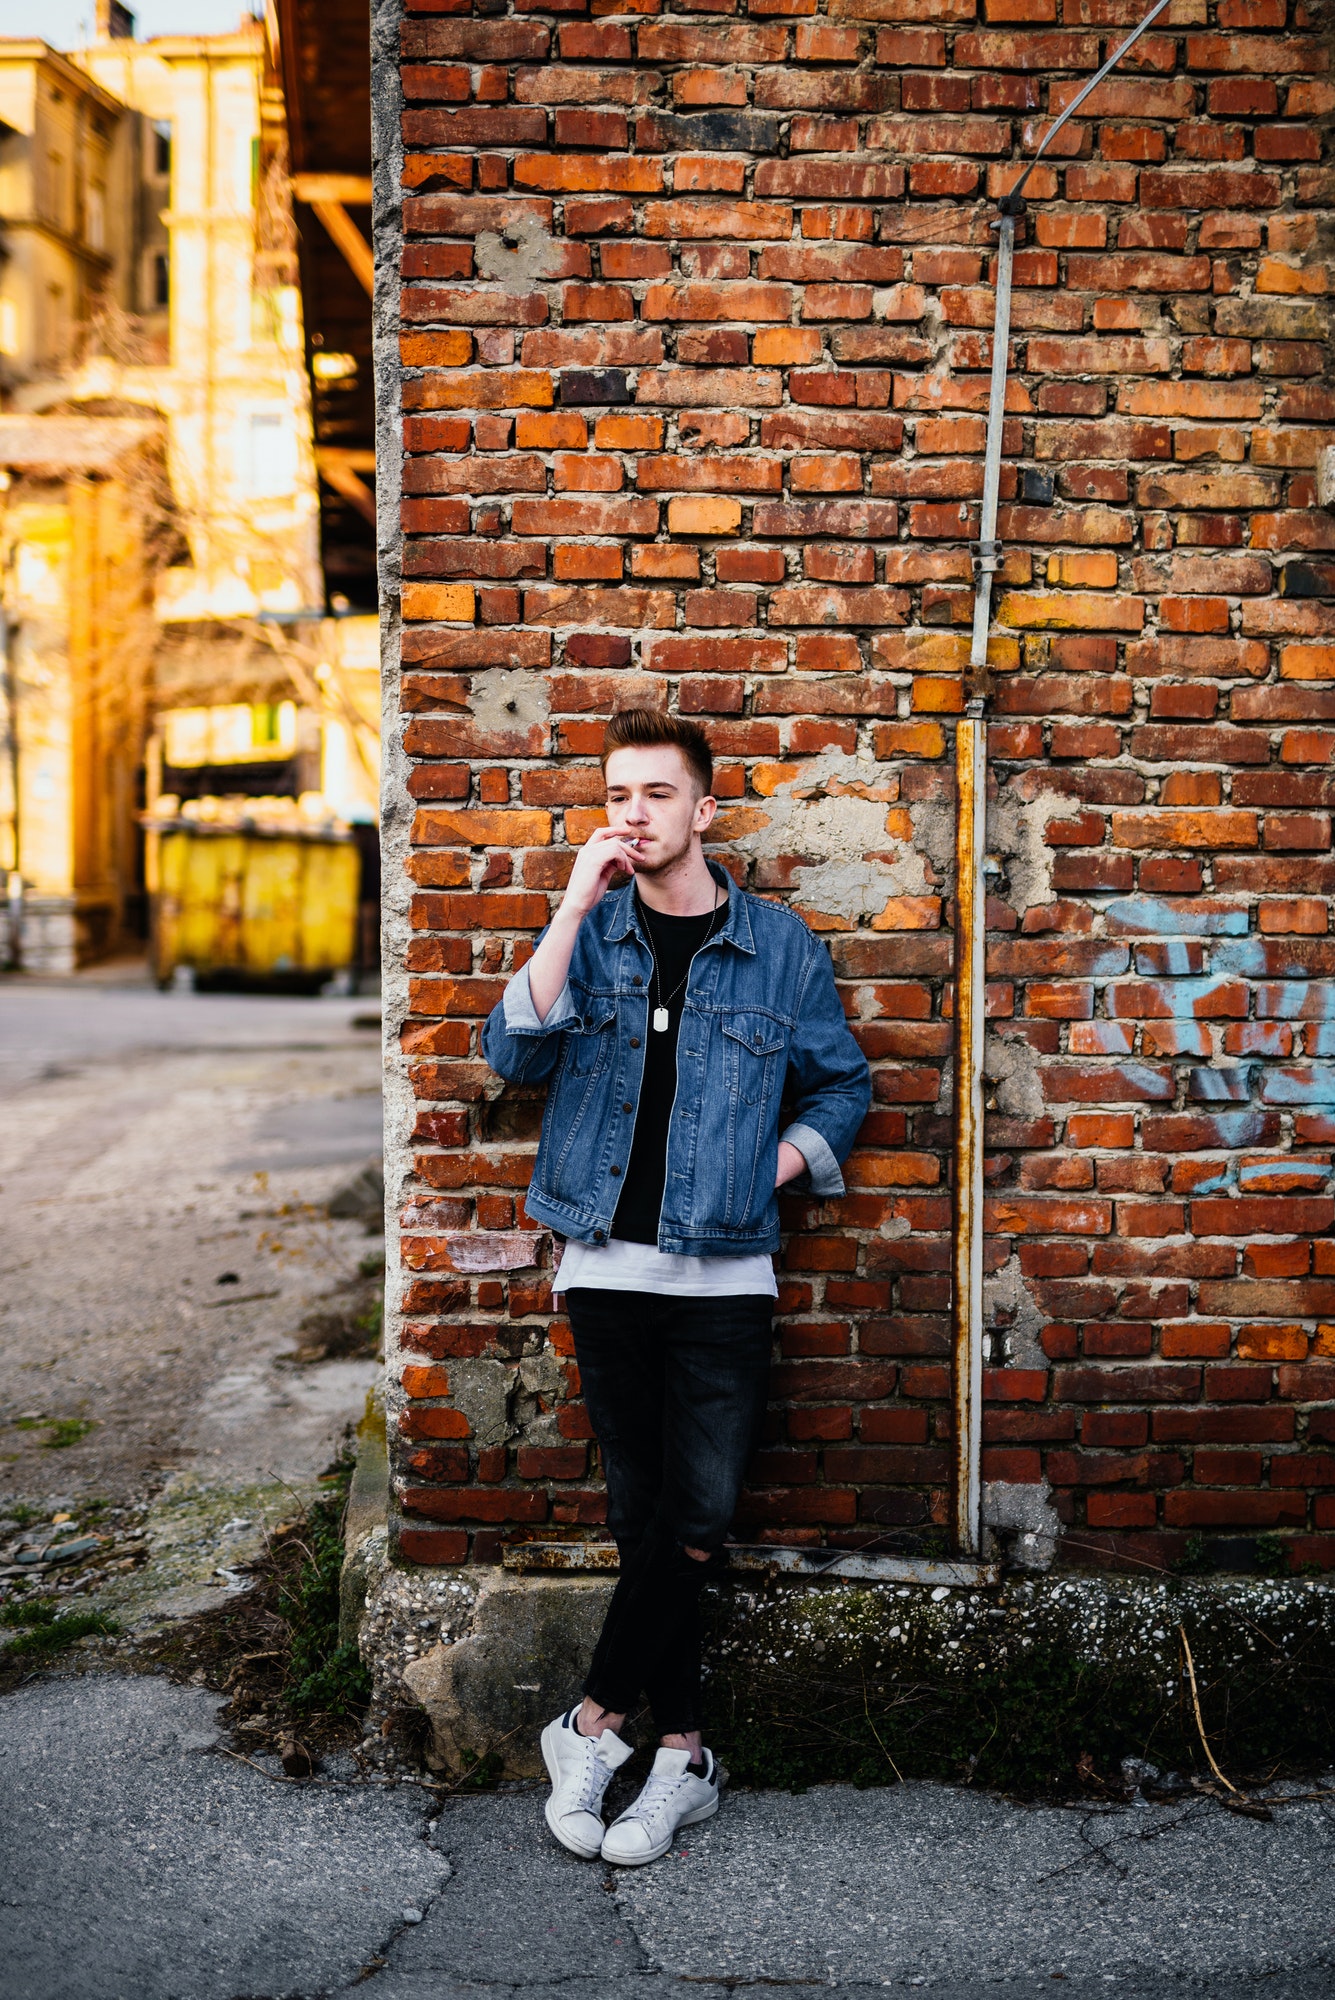 Young man in front of brick wall smoking cigarette